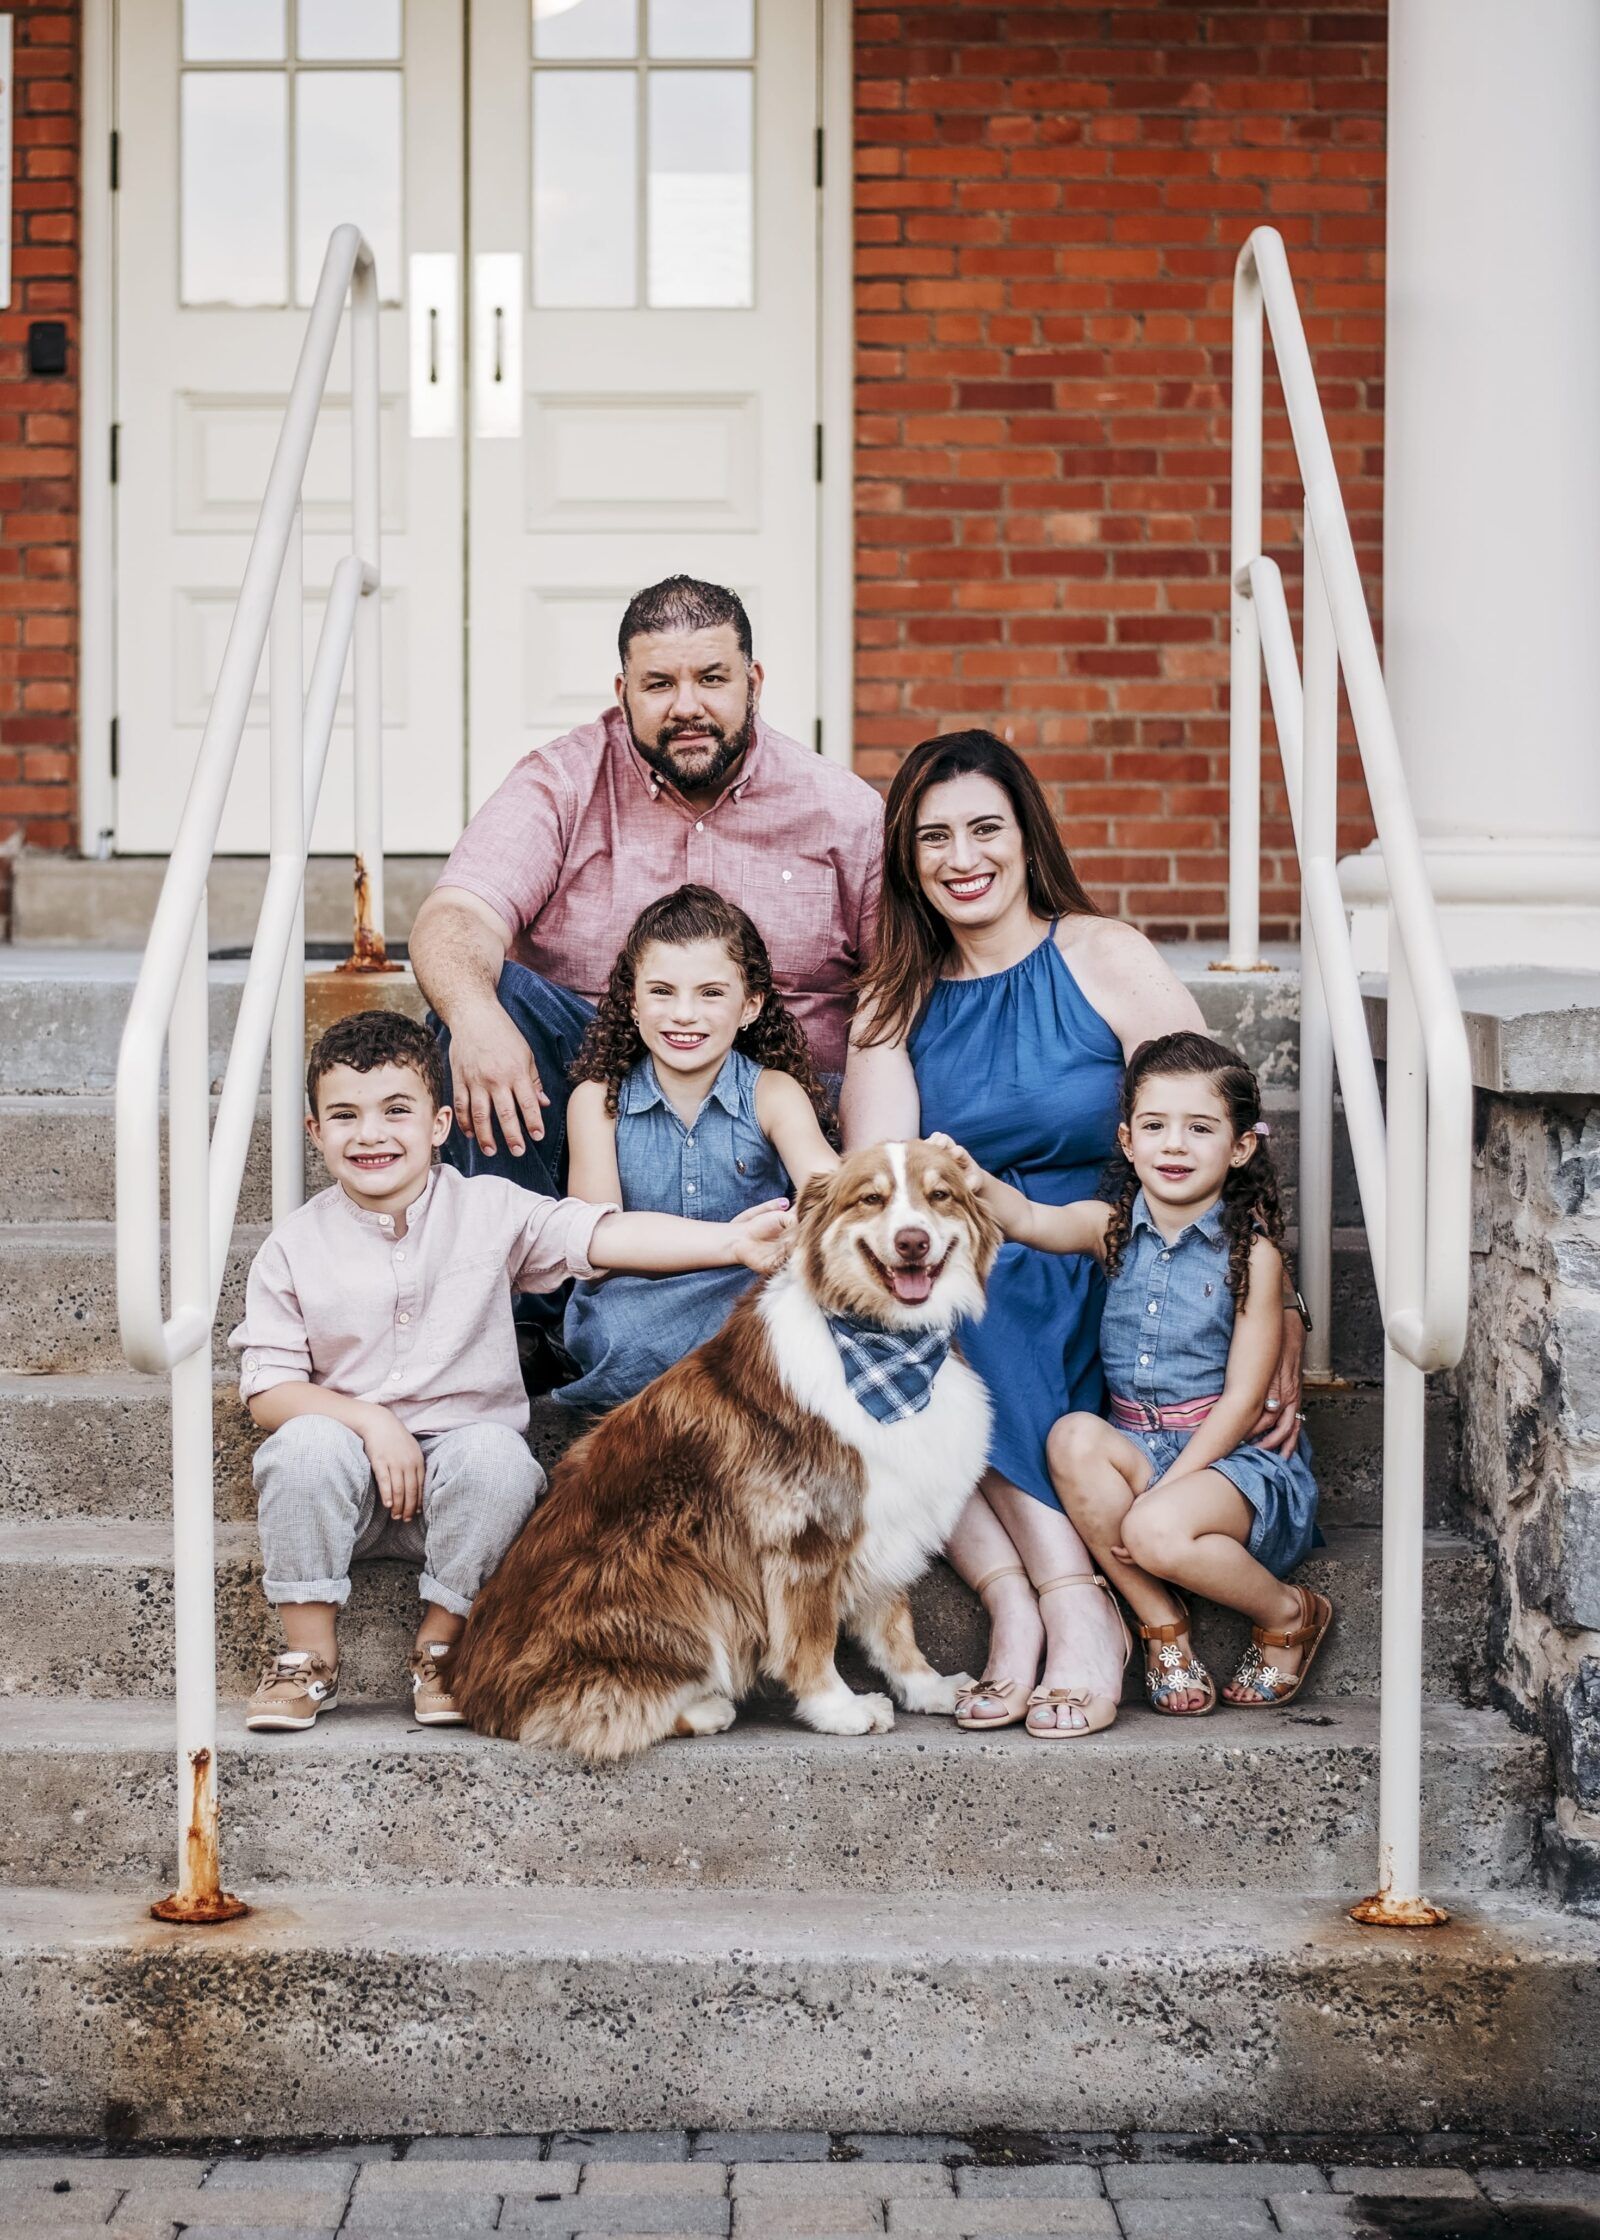 Dr. Maria Laura Ybarra with family and pet dog